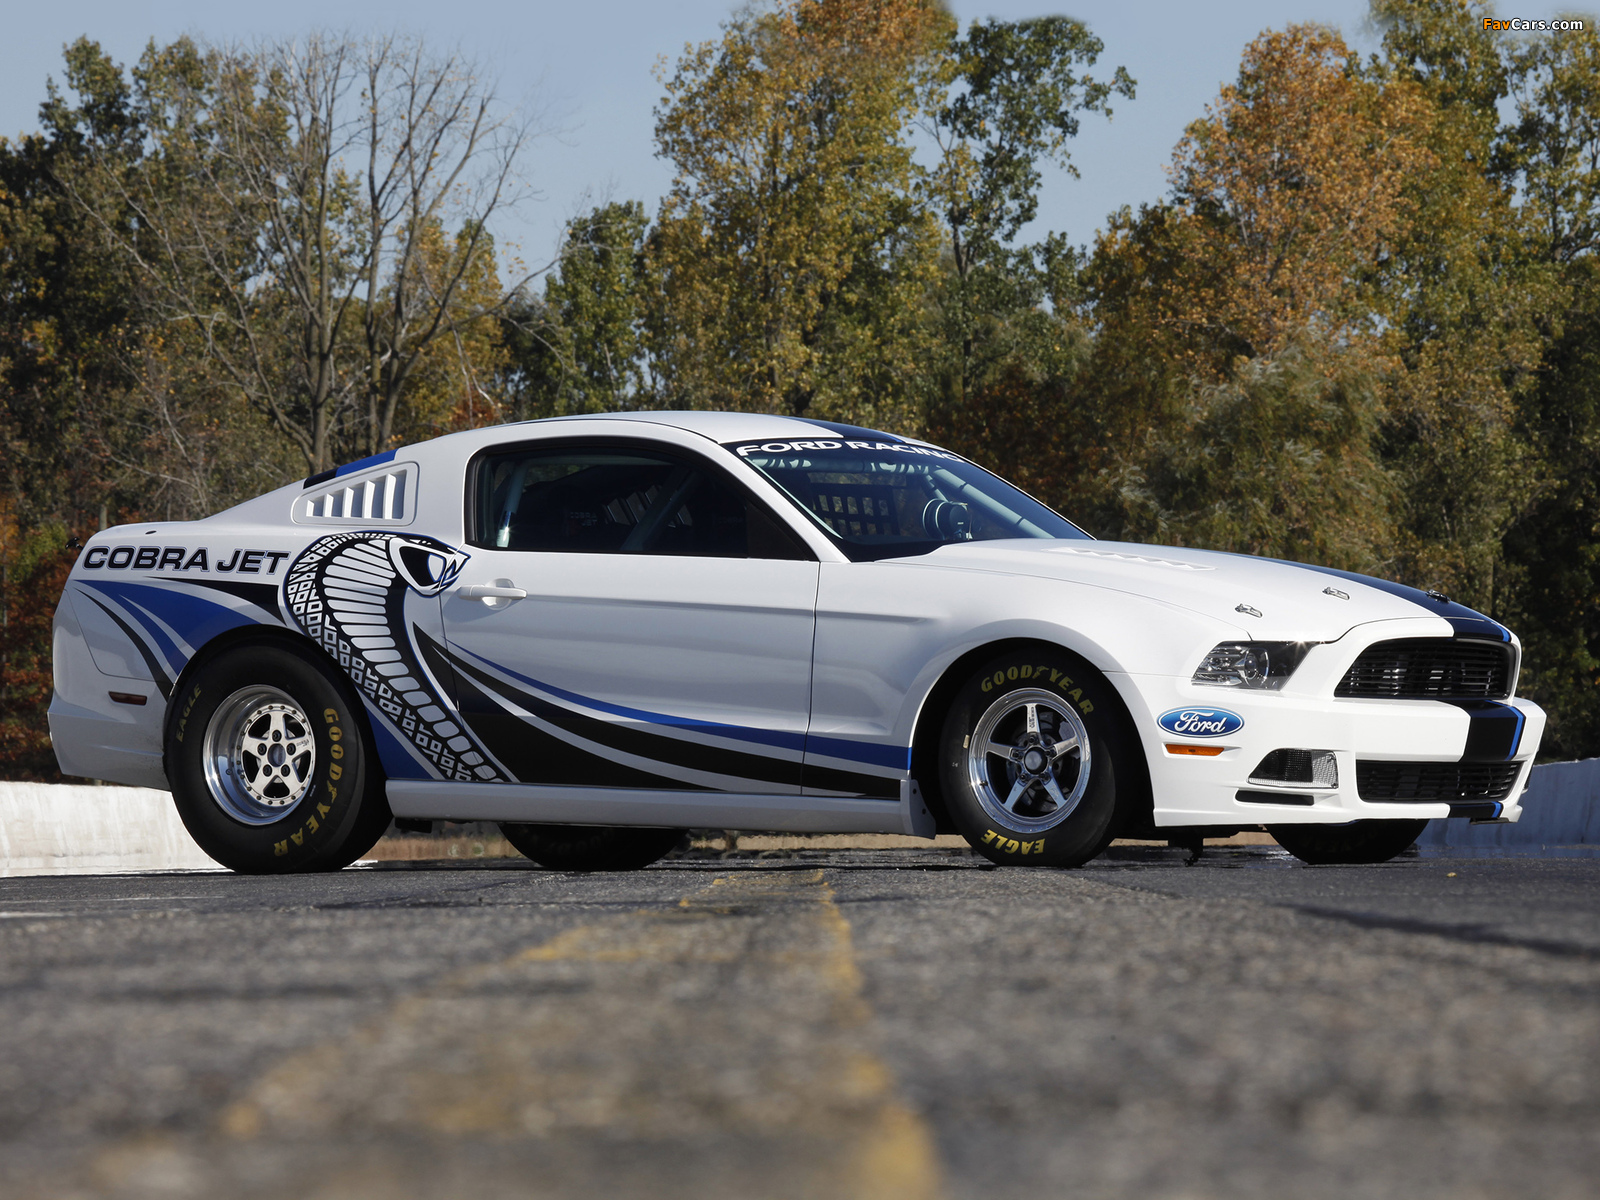 Ford Mustang Cobra Jet Twin-Turbo Concept 2012 pictures (1600 x 1200)